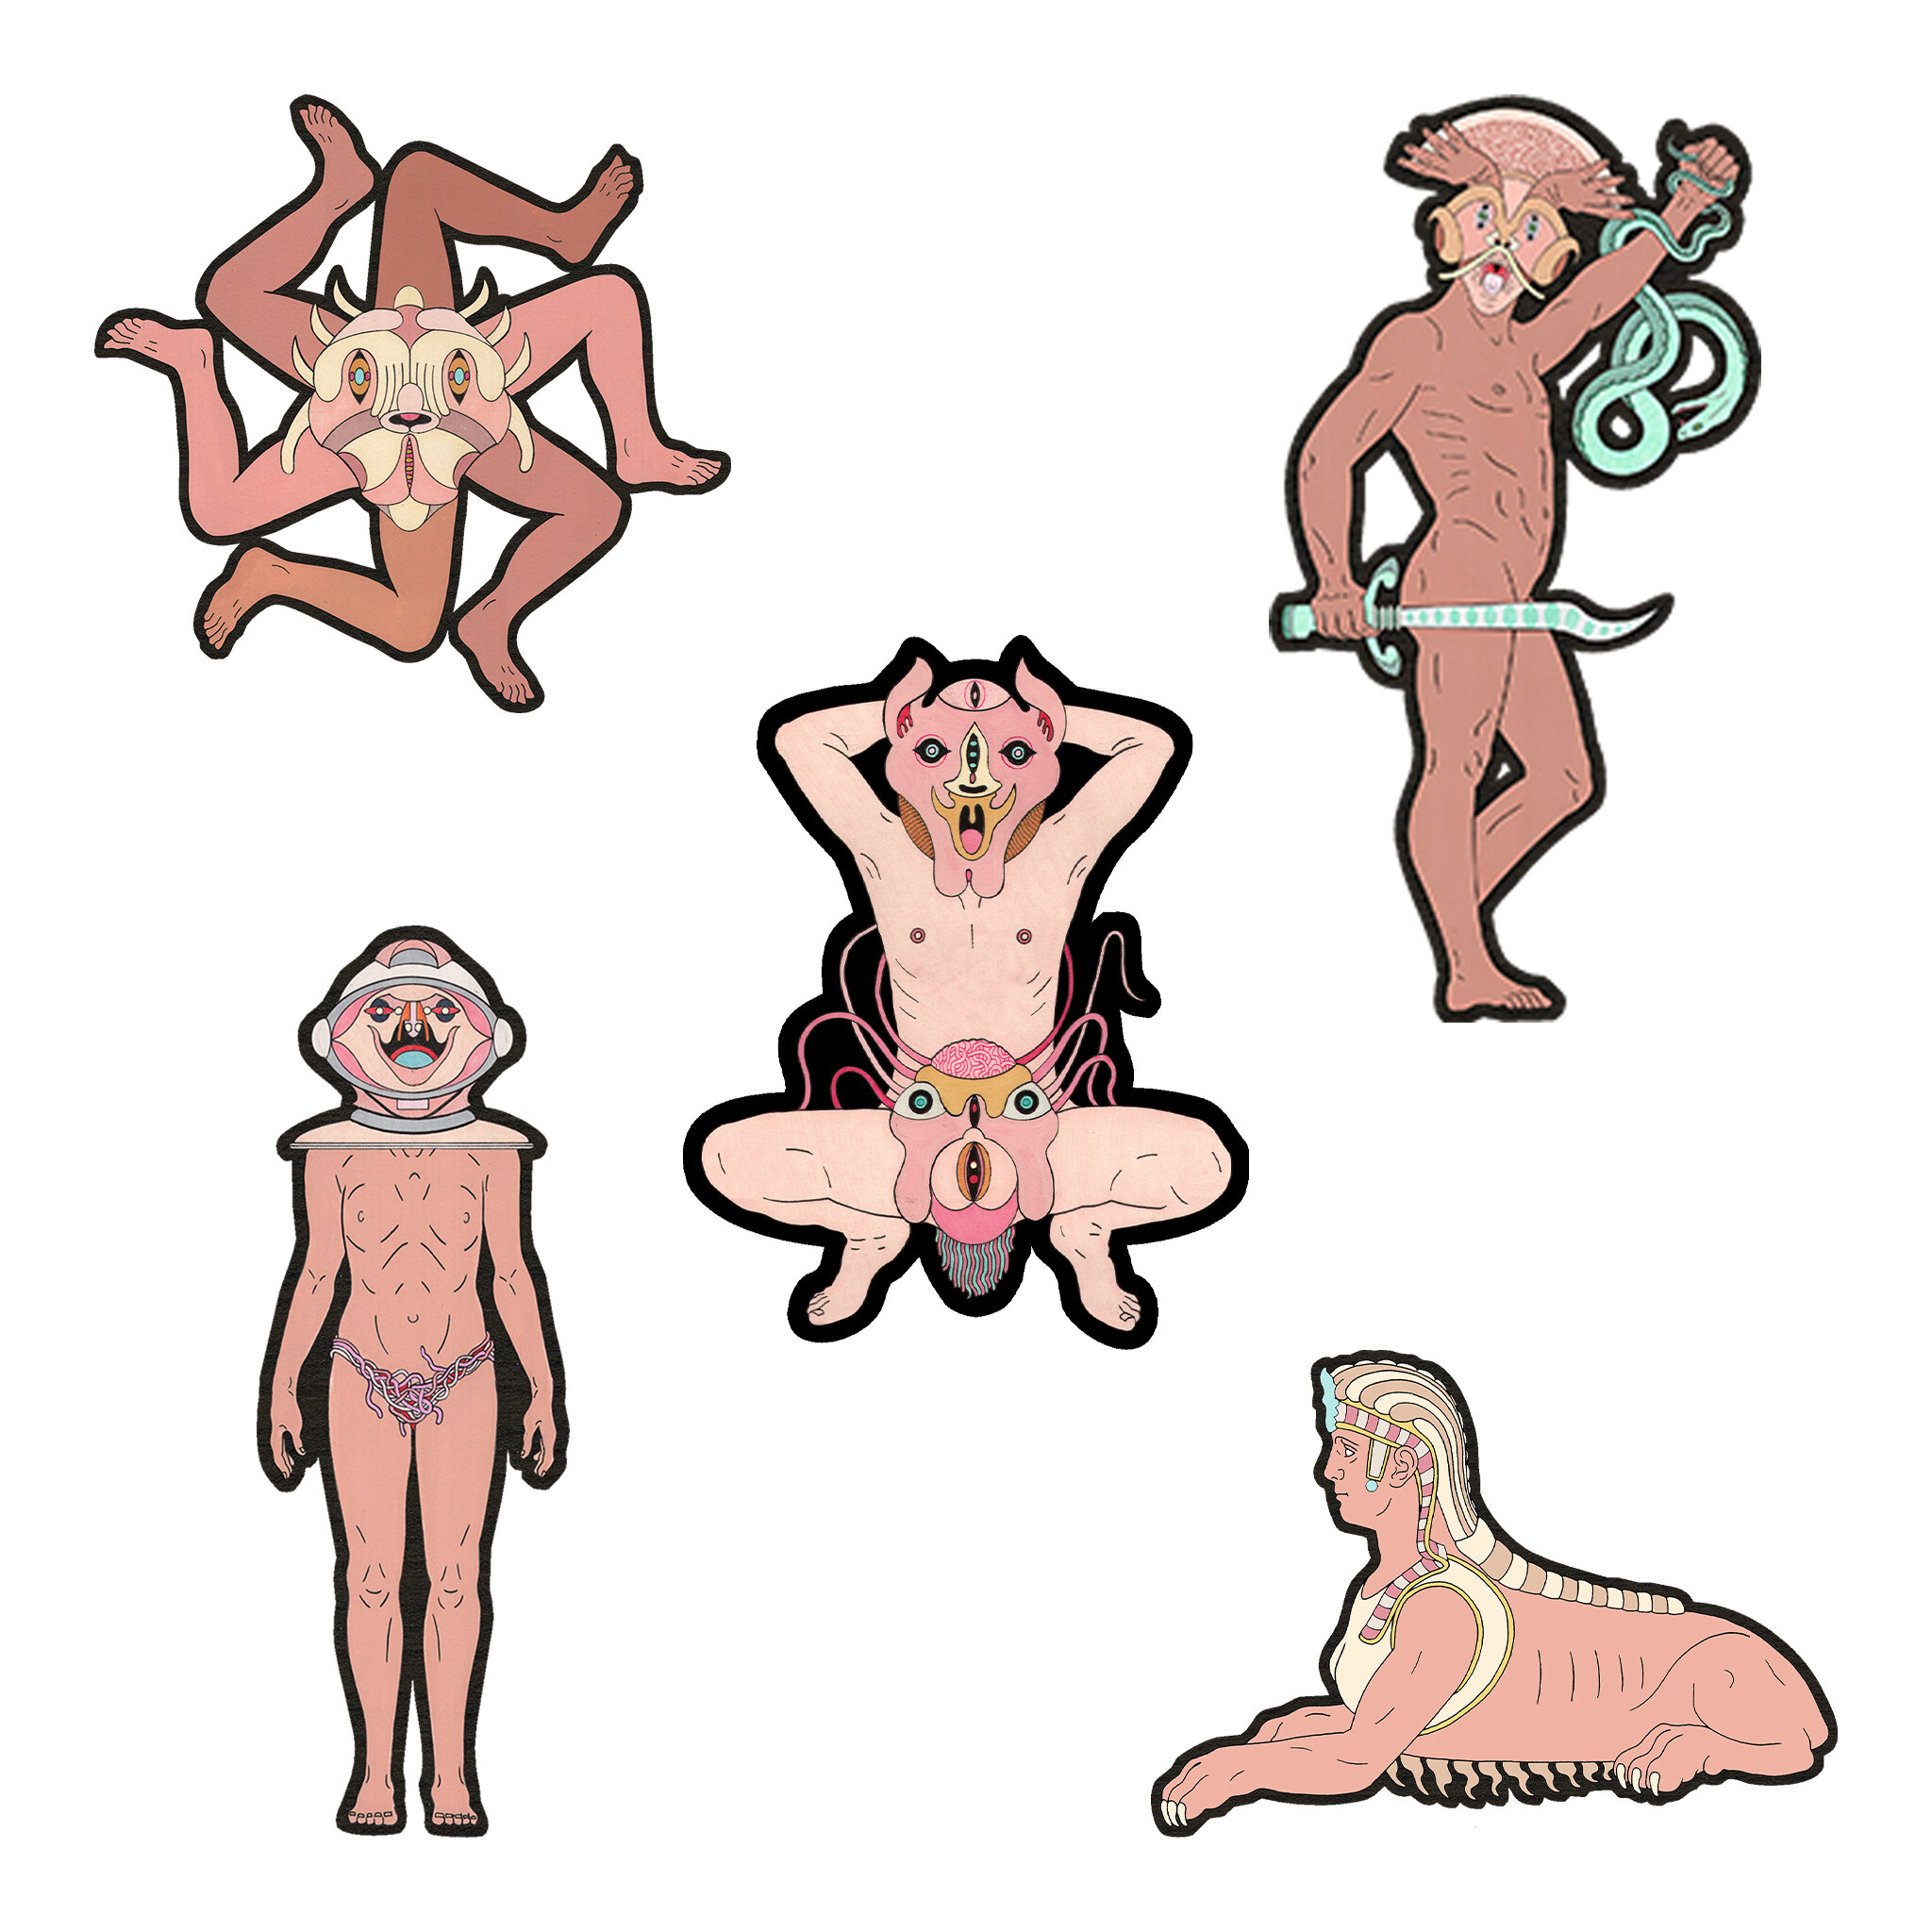 Figures_stickers_ALL_web.jpg